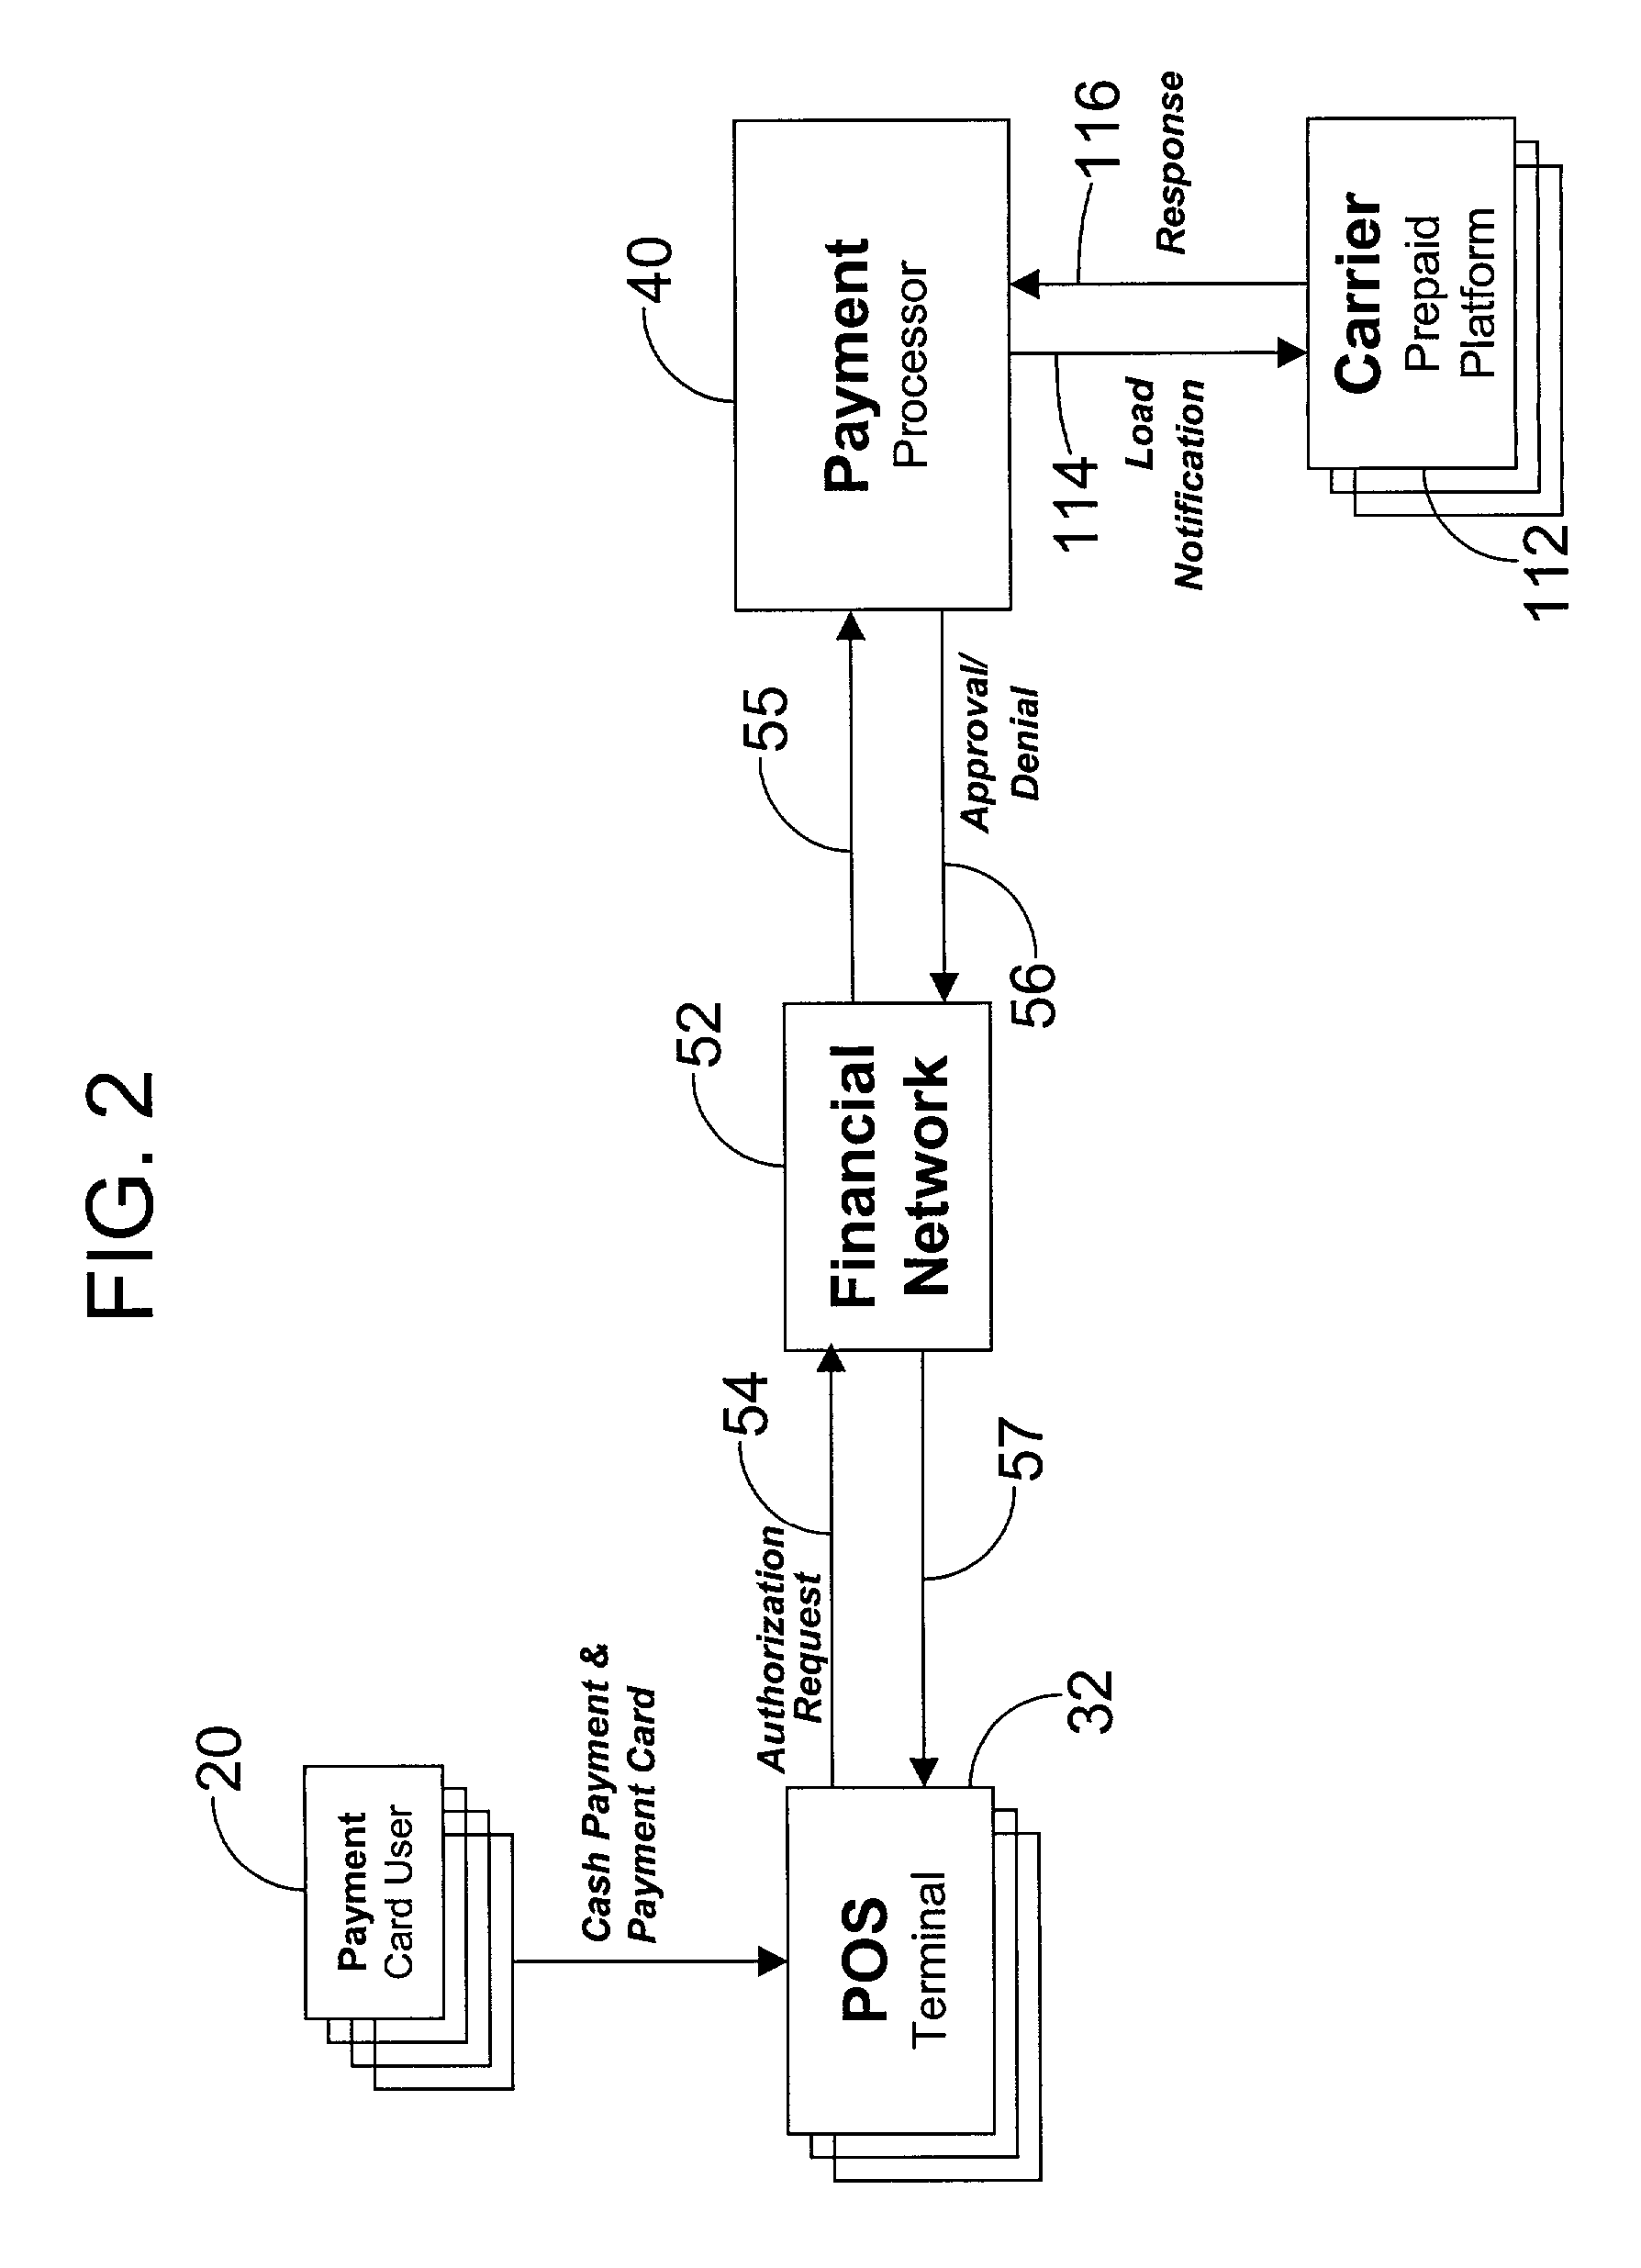 Electronic payment system utilizing intermediary account